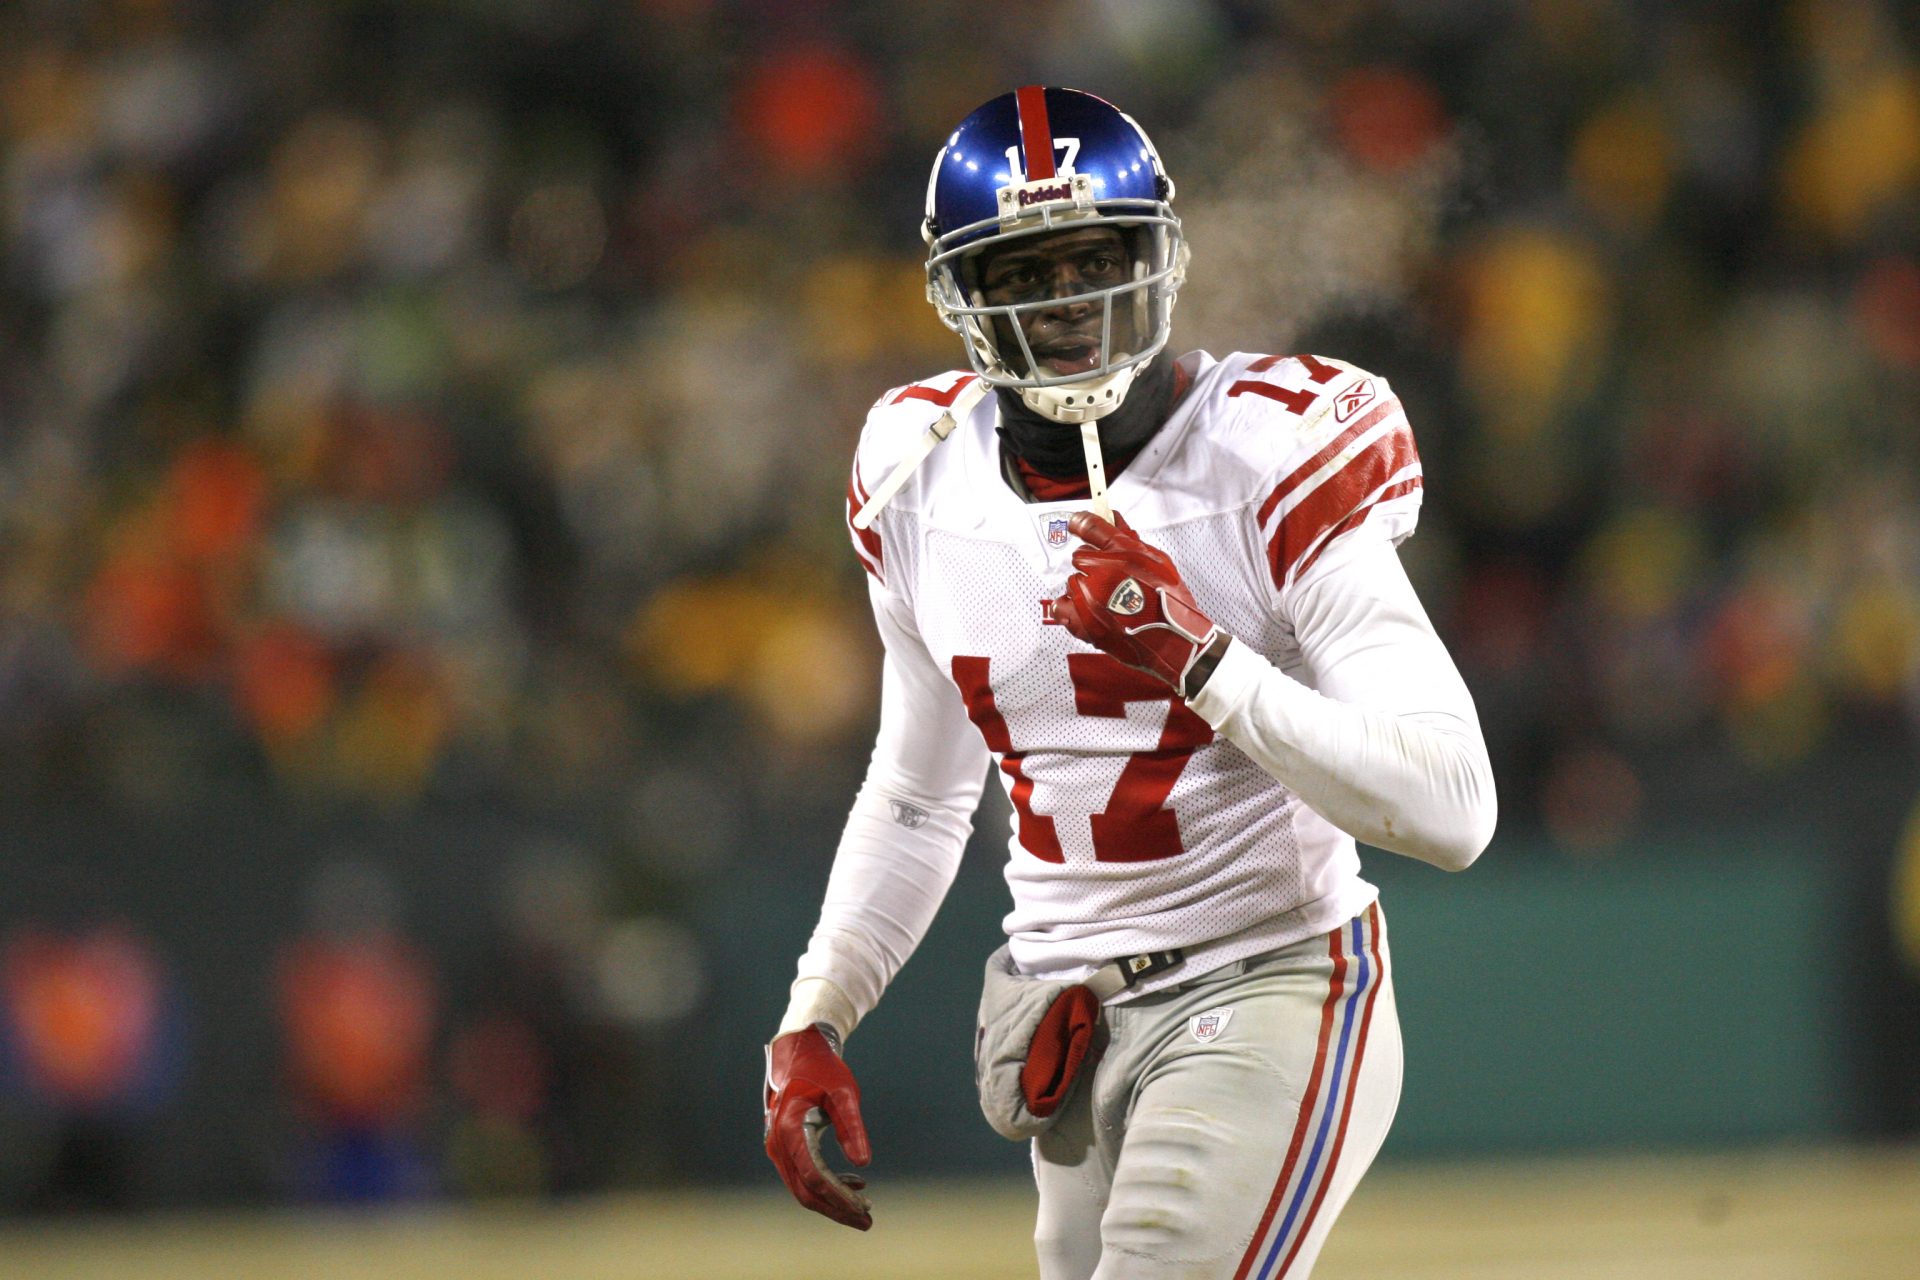 What happened to Plaxico Burress, the Super Bowl champ who accidentally shot himself?